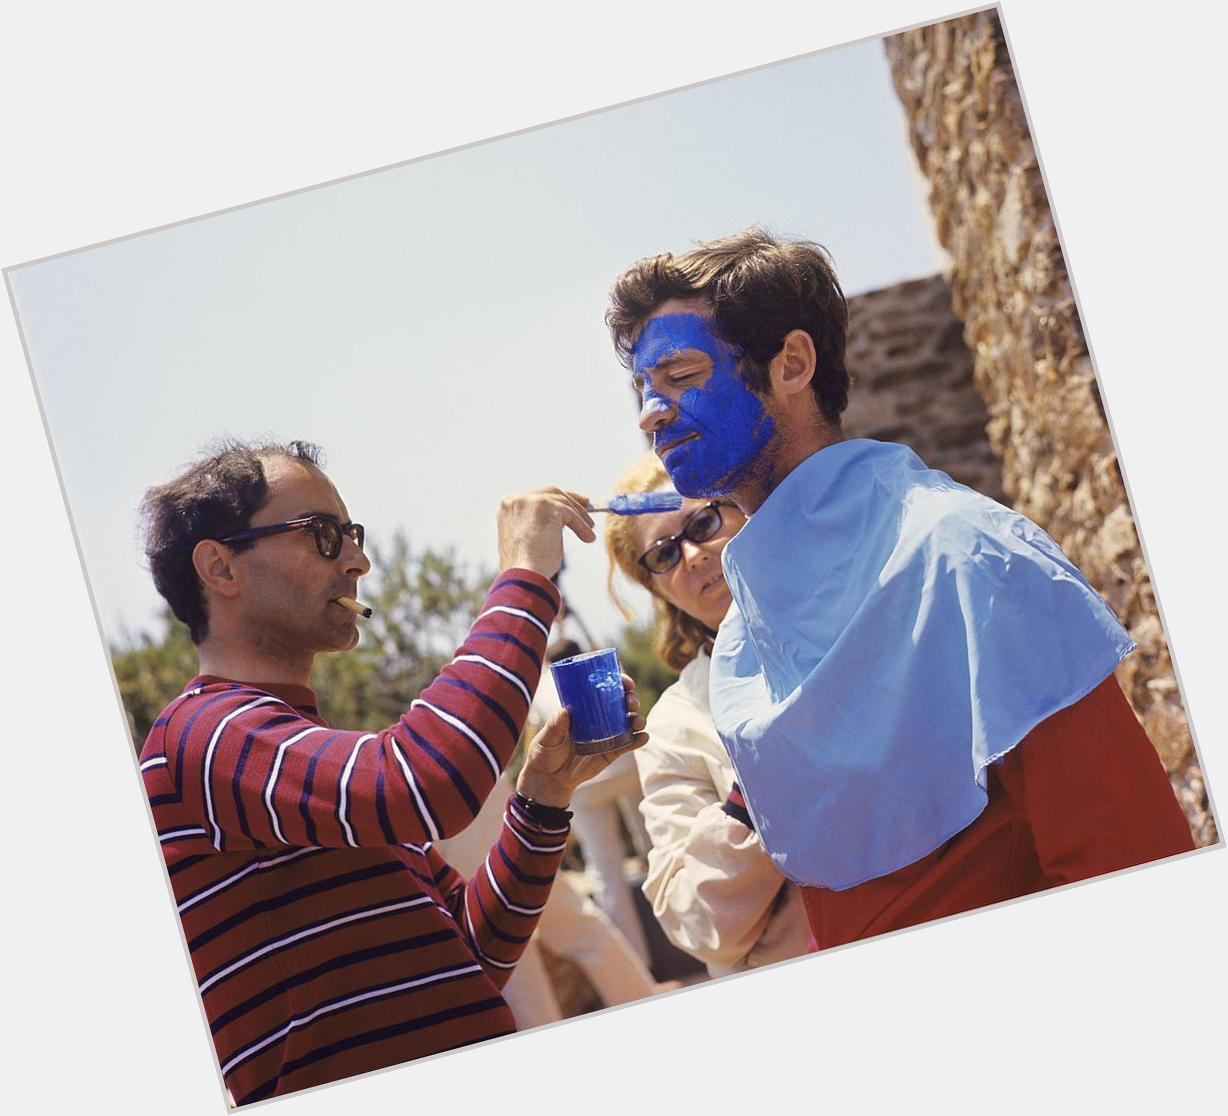 Happy birthday Jean-Paul Belmondo, here having his face painted by Godard on the set of Pierrot Le Fou (1965). 